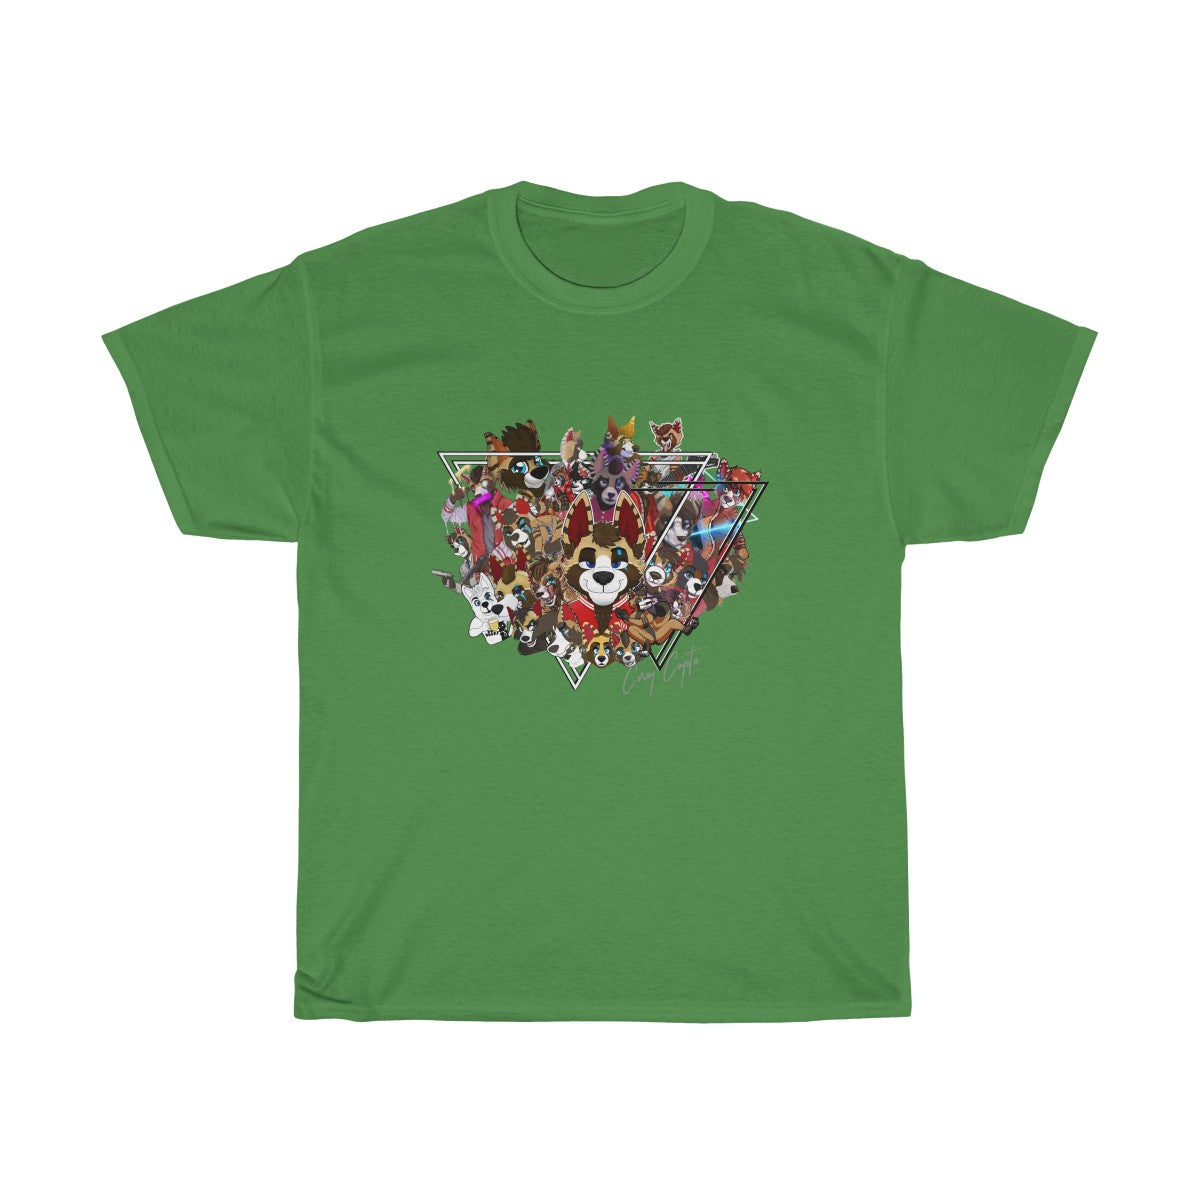 For The Fans - T-Shirt T-Shirt Corey Coyote Green S 